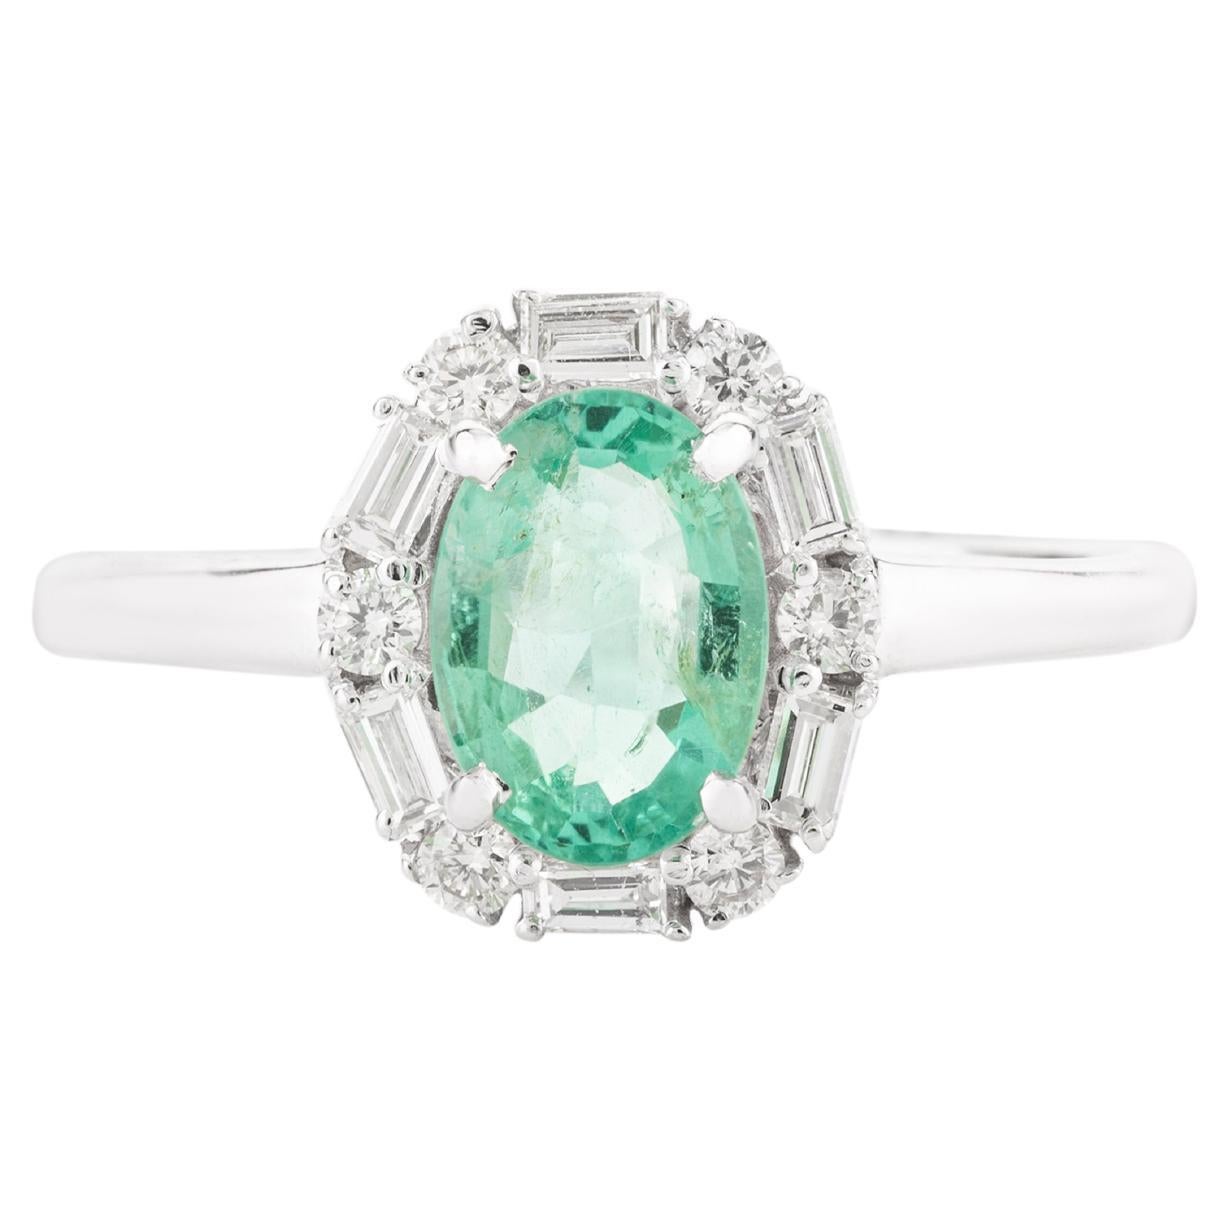 Art Deco Style Emerald Engagement Ring with Halo Diamonds in 14k White Gold